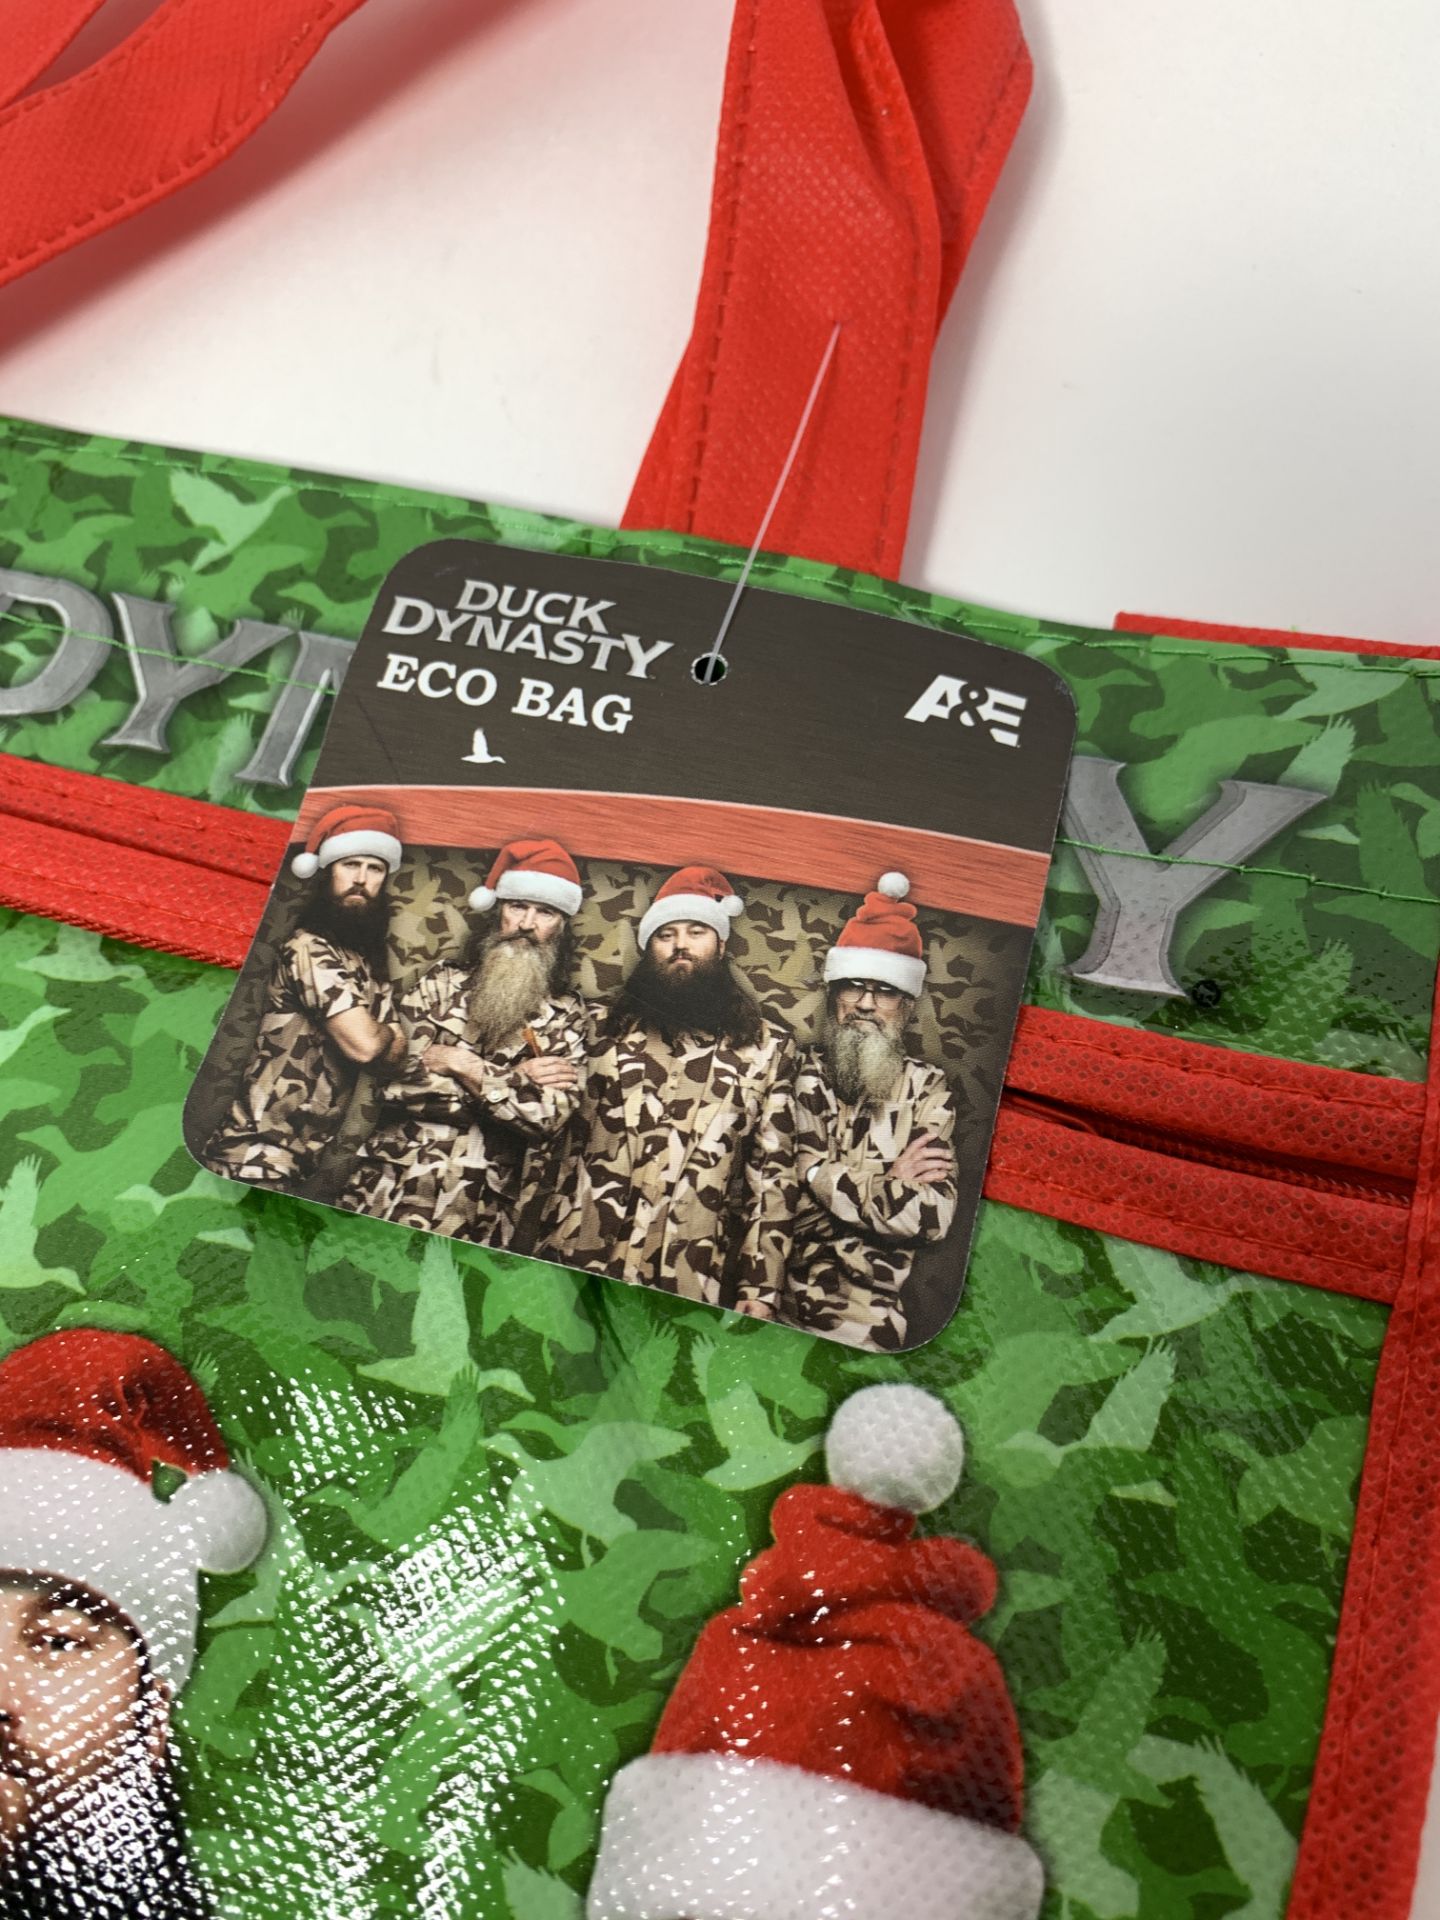 2,750 WHOLESALE PRICED Duck Dynasty Eco Tote Bags, 2 Interior Sections, RETAIL READY, NWT, $.12 EA! - Image 7 of 9